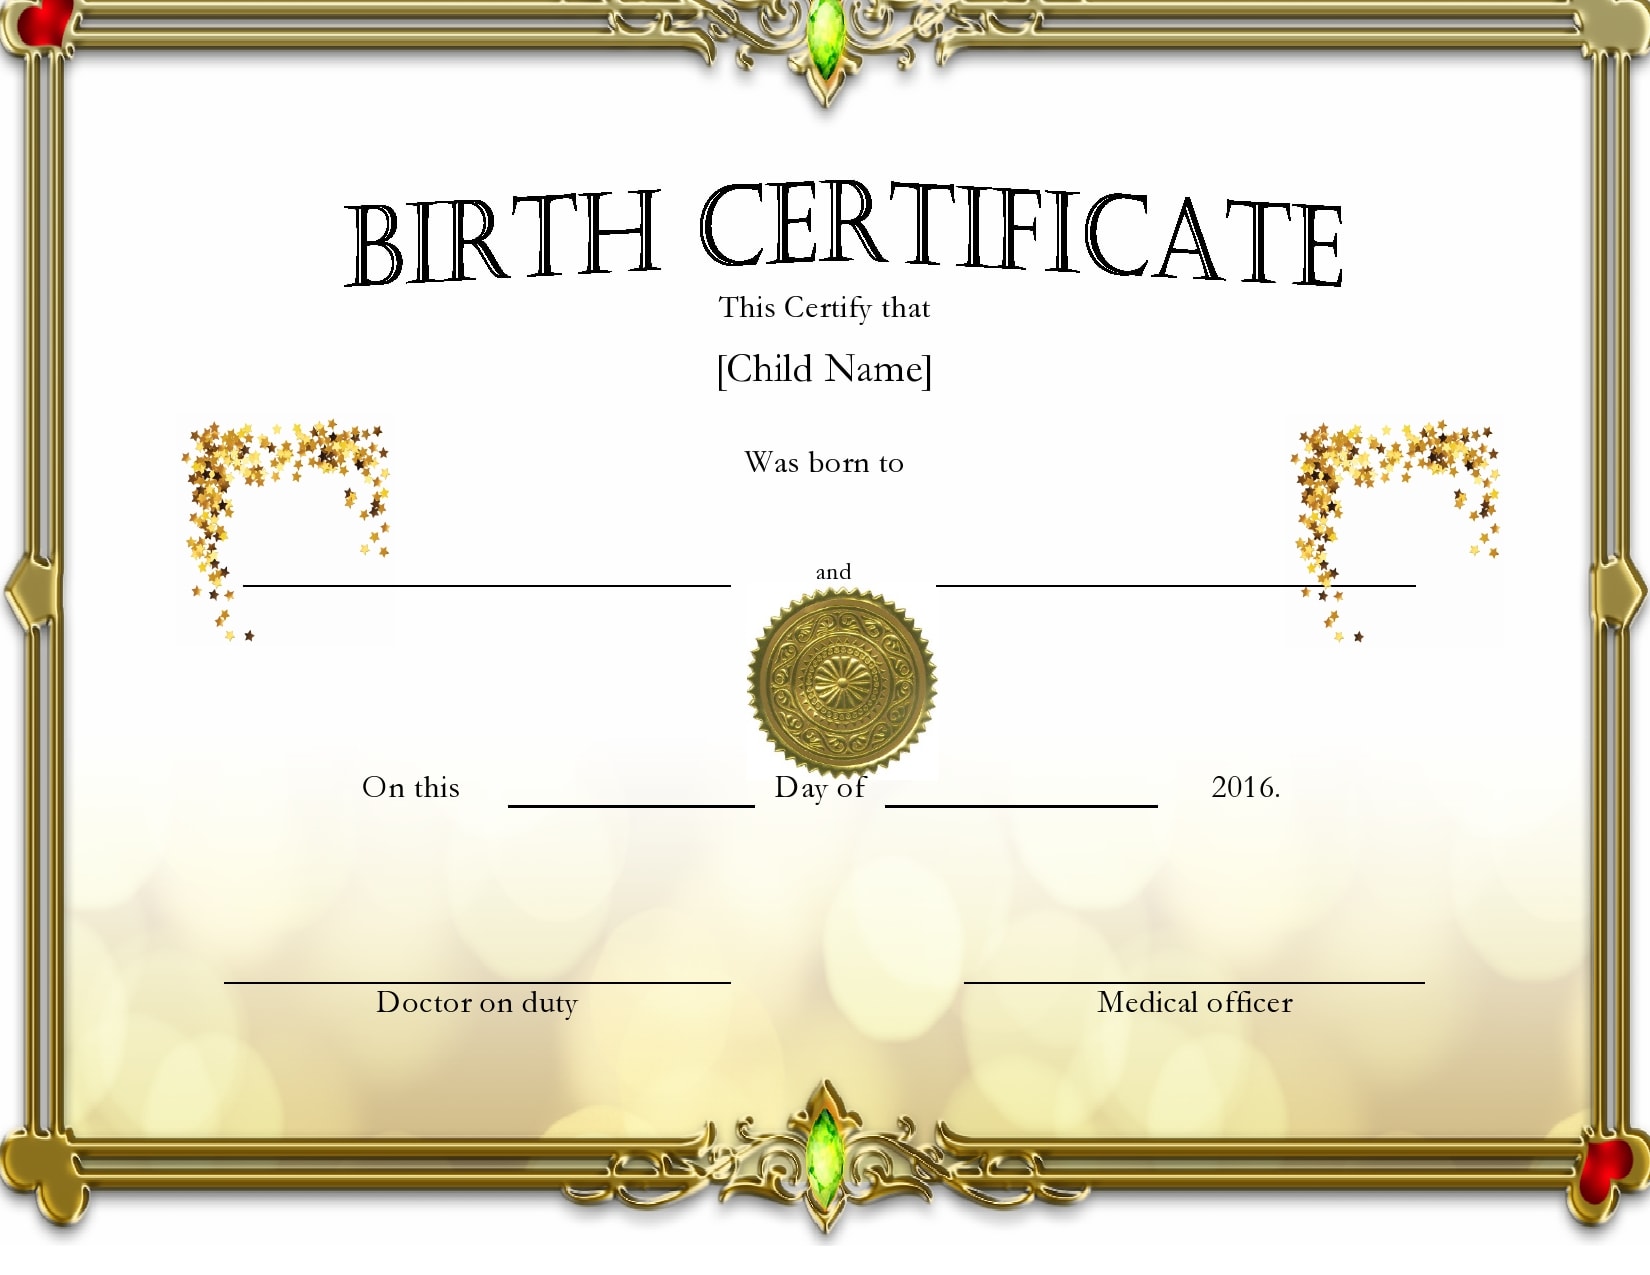 20 Blank Birth Certificate Templates (& Examples) - PrintableTemplates For Editable Birth Certificate Template